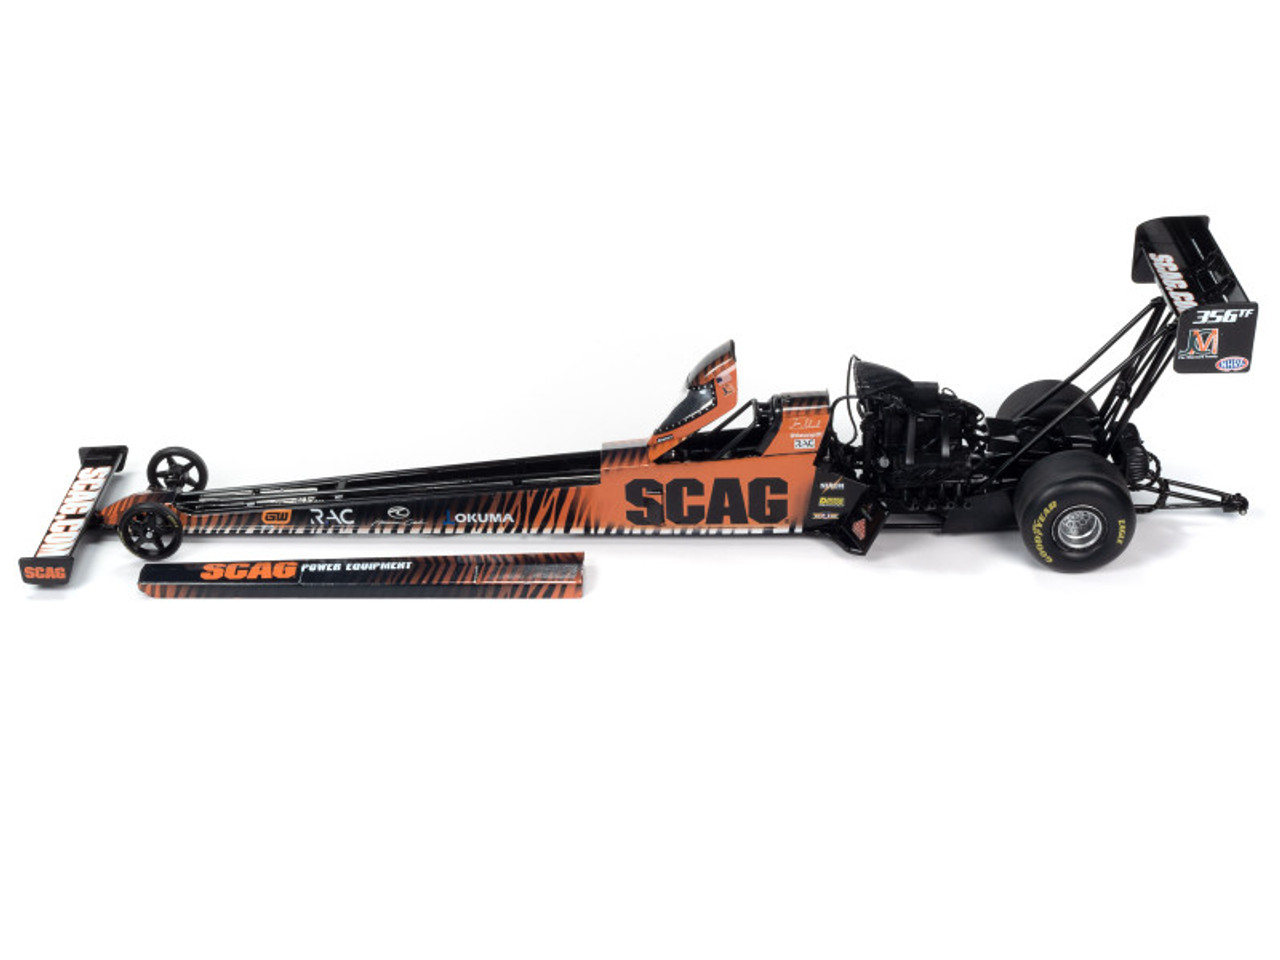 2023 NHRA TFD (Top Fuel Dragster) Tony Schumacher "SCAG Power Equipment" Orange and Black "Maynard Family Racing Team" Limited Edition to 1236 pieces Worldwide 1/24 Diecast Model by Auto World